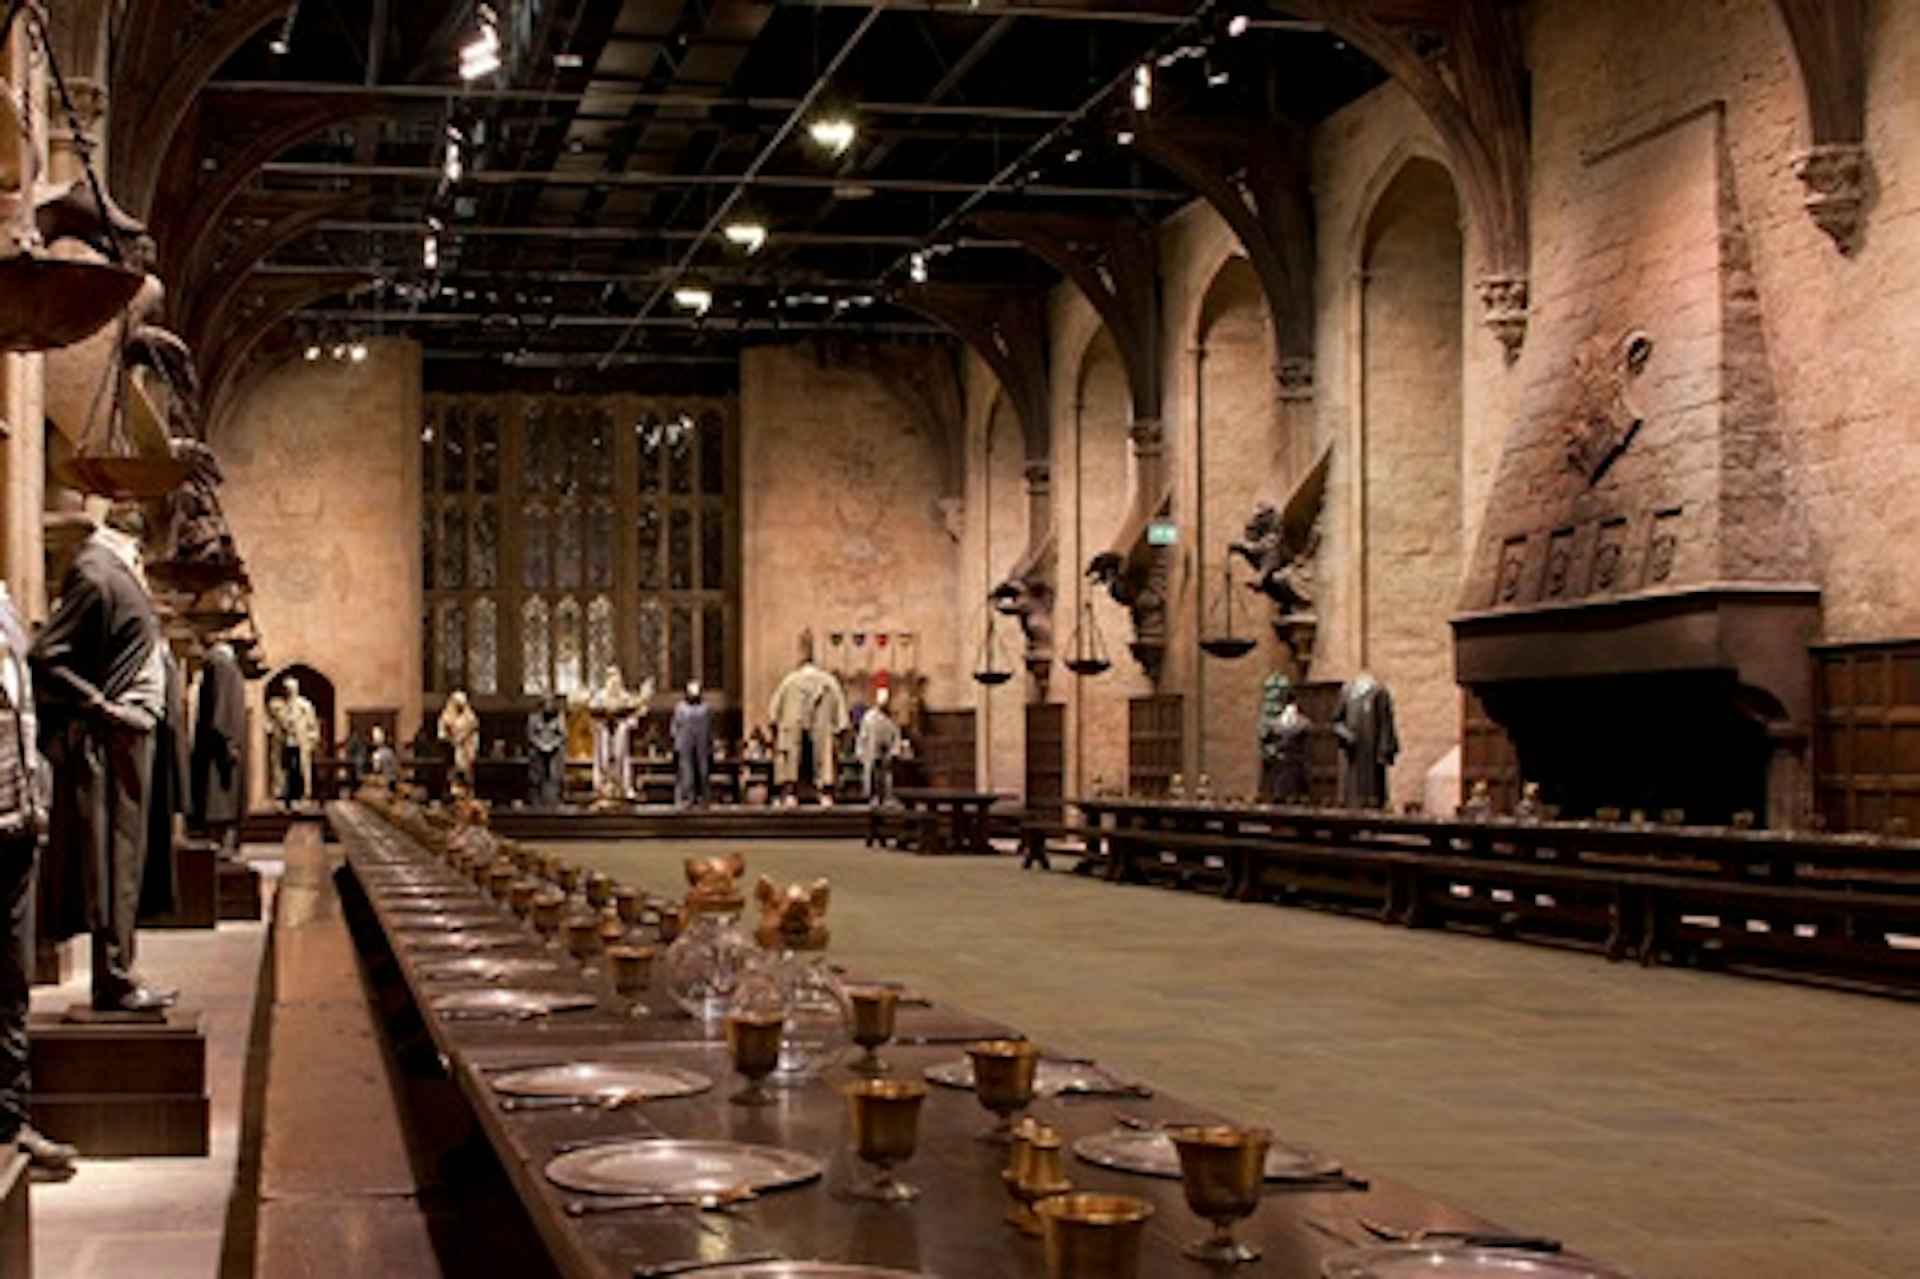 Warner Bros. Studio Tour London - The Making of Harry Potter with Return Transportation for One Adult and One Child 3